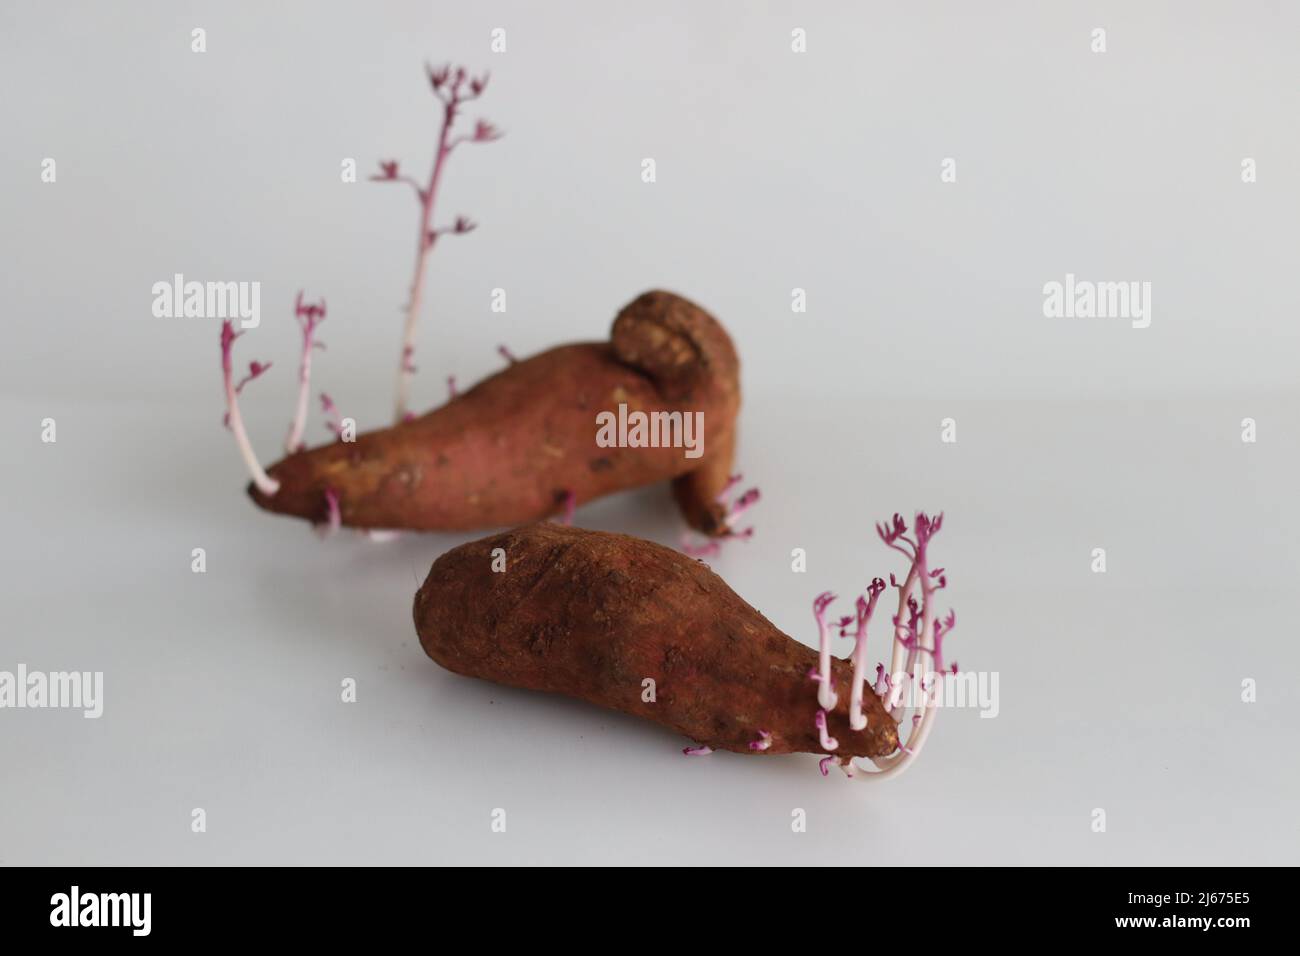 Sprouted sweet potato. The sweet potato or sweetpotato is a dicotyledonous plant that belongs to the bindweed or morning glory family, Convolvulaceae. Stock Photo